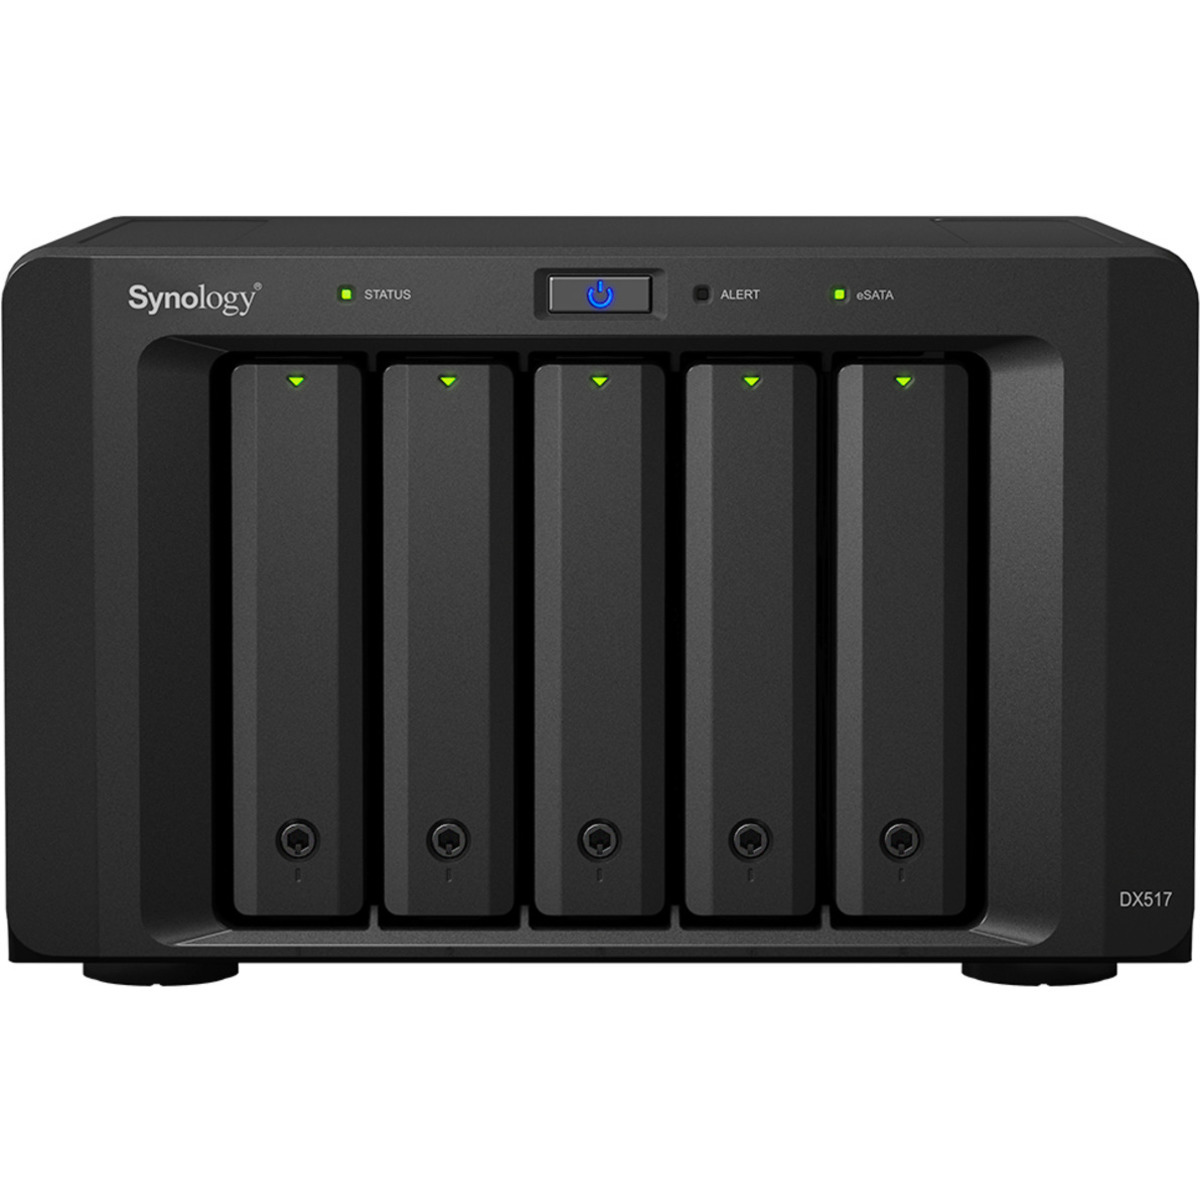 Synology DX517 External Expansion Drive 30tb 5-Bay Desktop Multimedia / Power User / Business Expansion Enclosure 5x6tb Western Digital Ultrastar DC HC310 HUS726T6TALE6L4 3.5 7200rpm SATA 6Gb/s HDD ENTERPRISE Class Drives Installed - Burn-In Tested DX517 External Expansion Drive